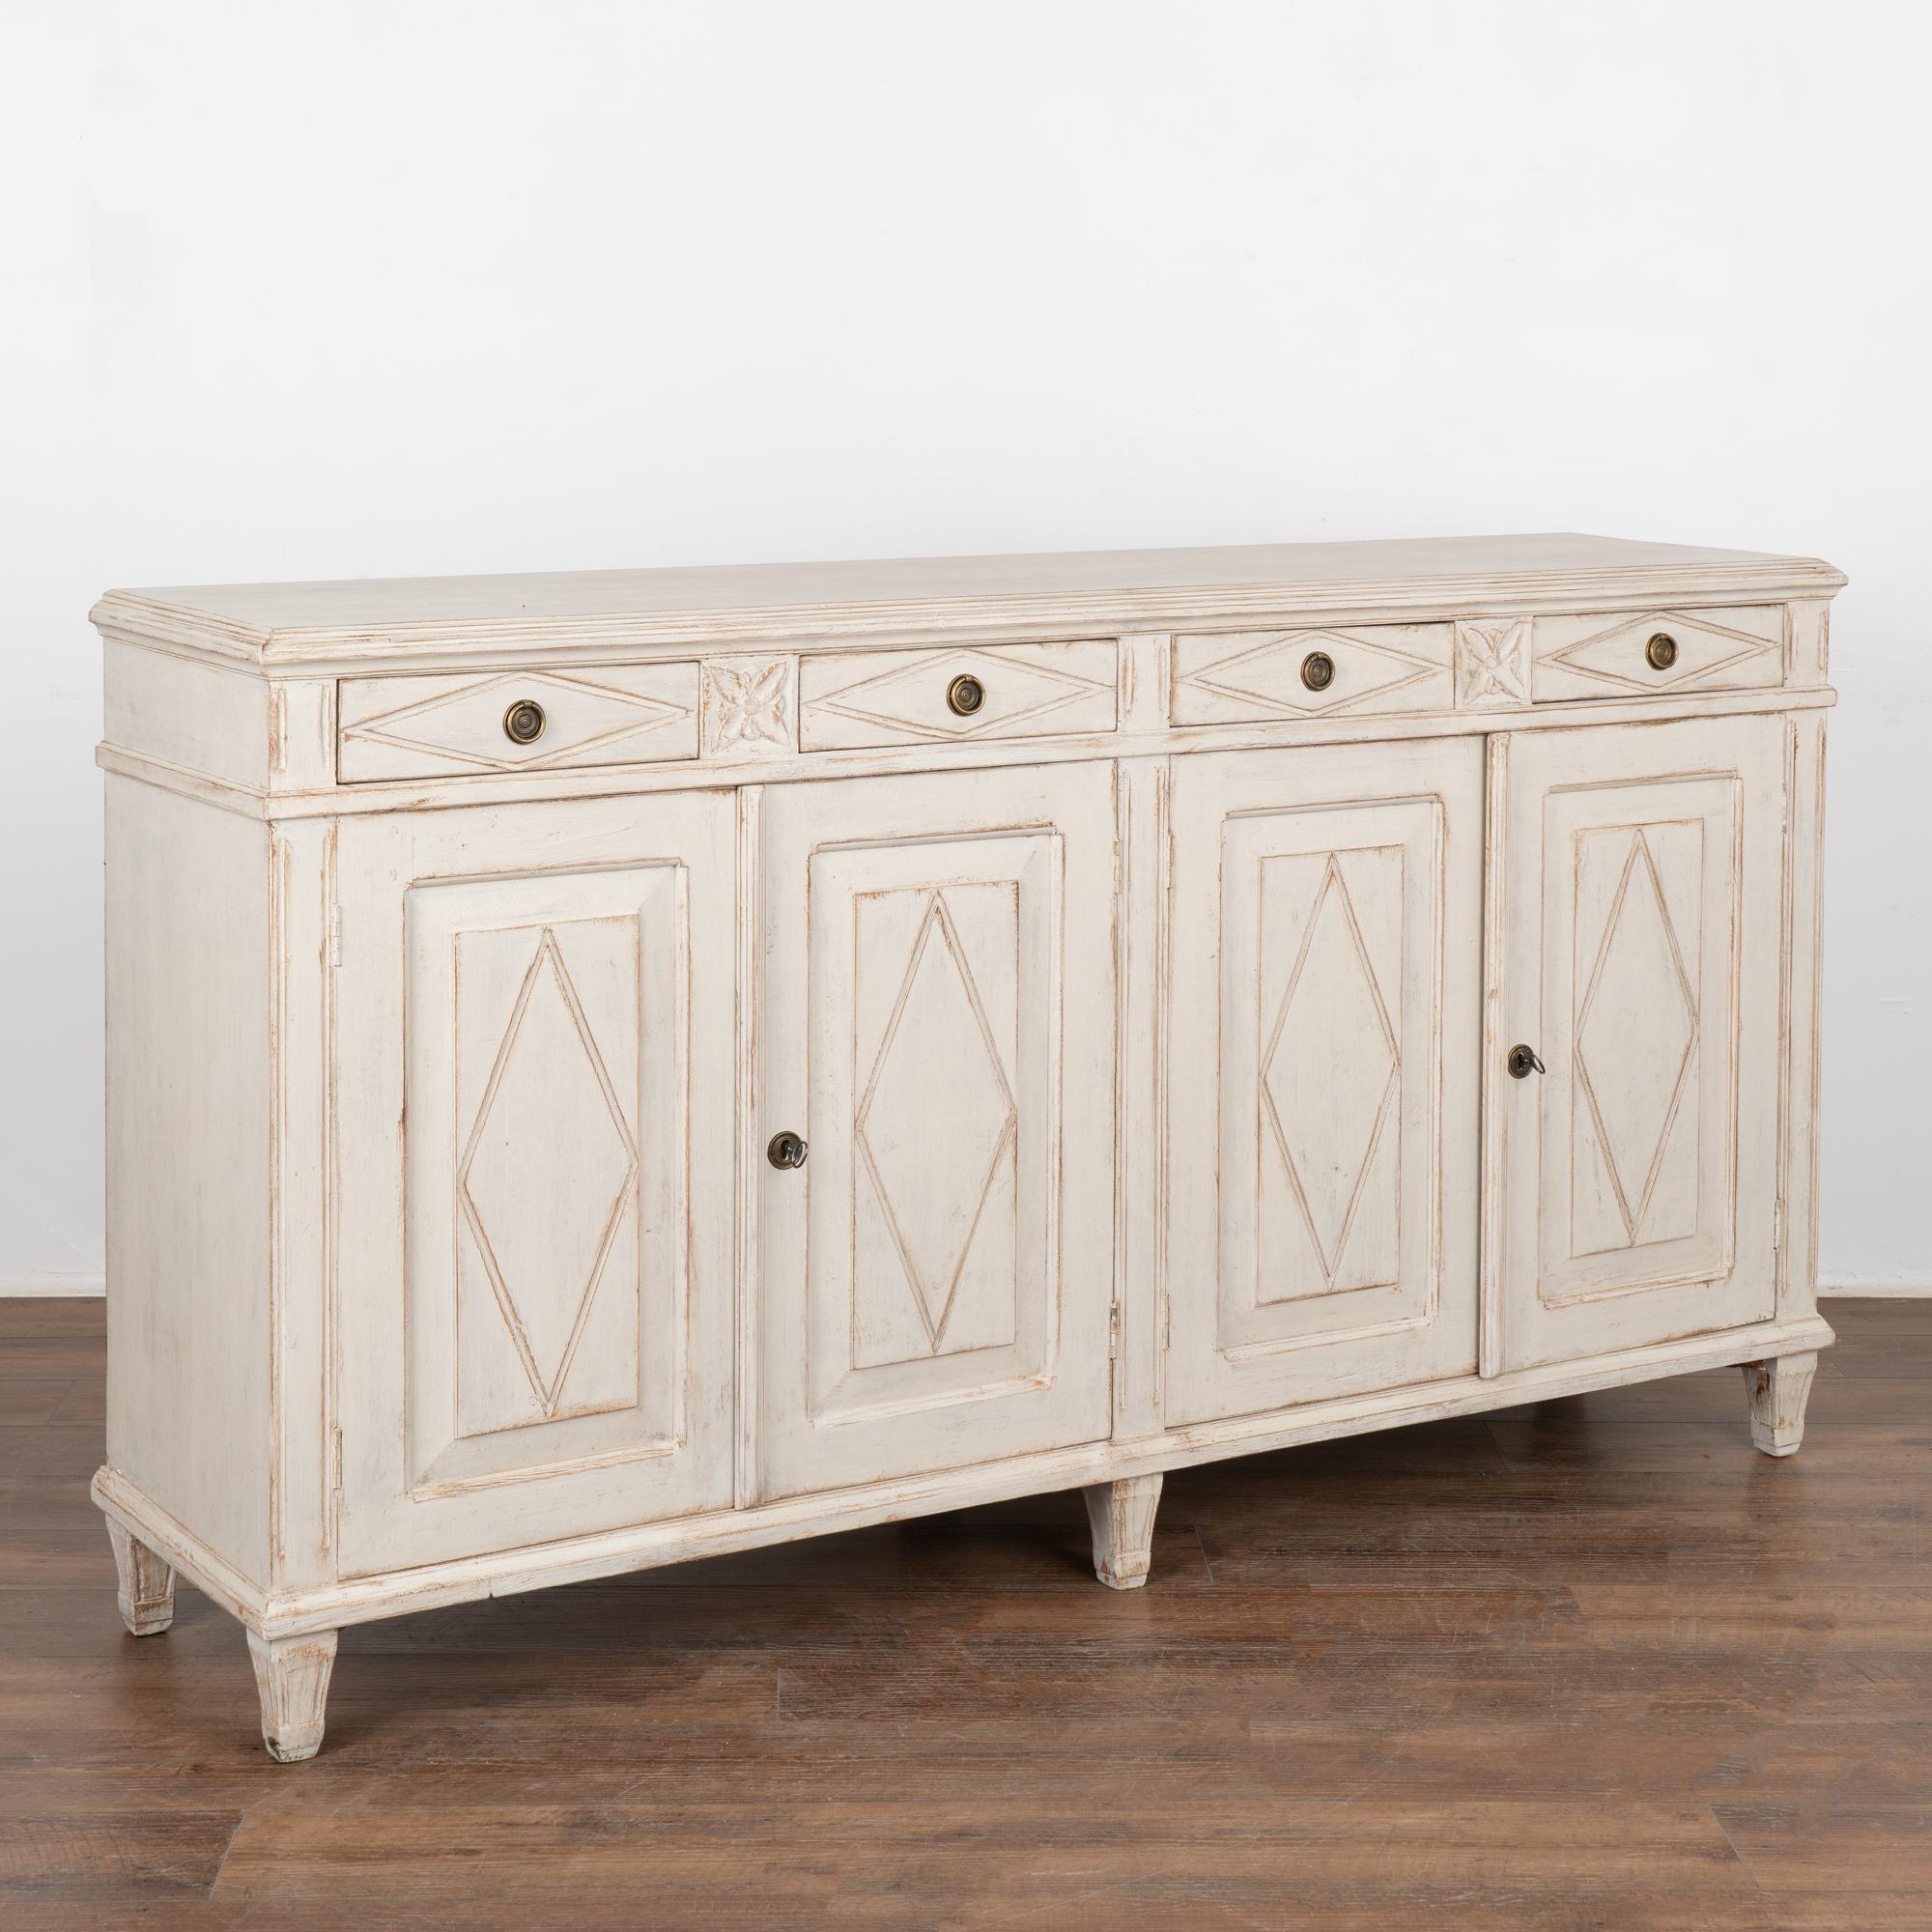 Swedish pine sideboard/buffet with traditional diamond motif carved in drawers and door panels. 
Four drawers over four cabinet doors, one long interior shelf.
Restored, later professionally painted in layered shades of white and lightly distressed